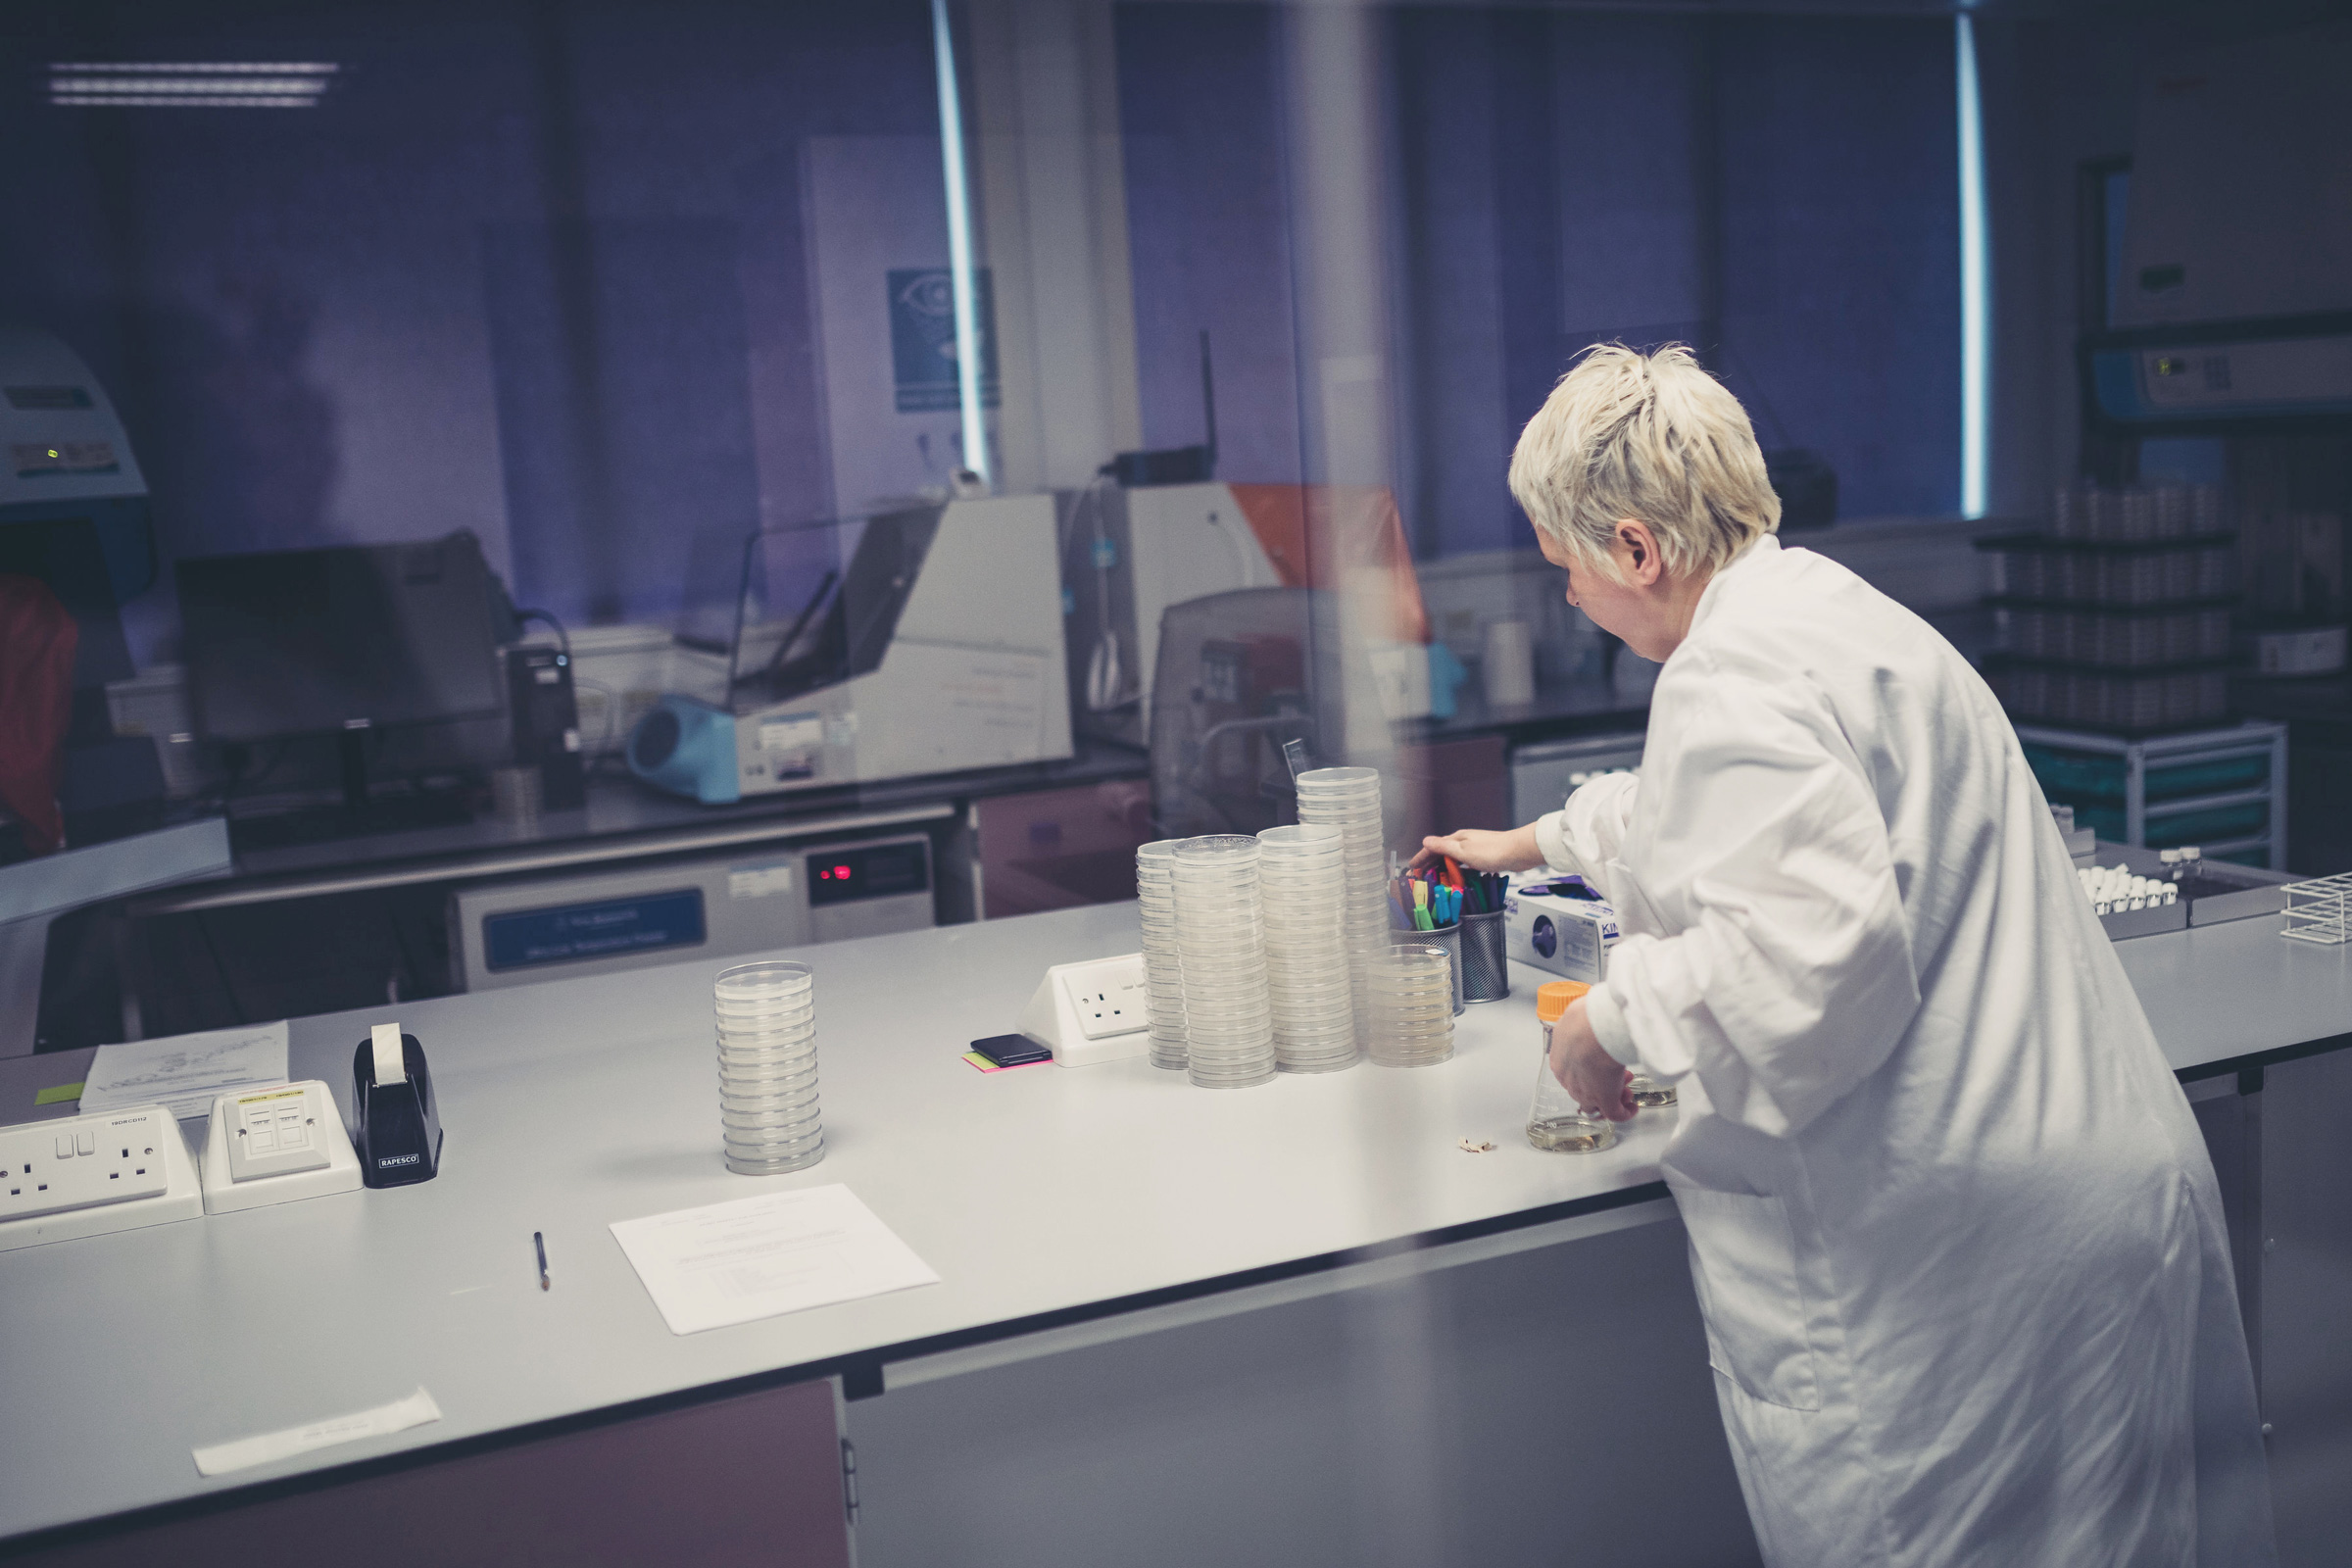 Laboratory professional in a white coat handling and organizing test tubes on a bench in a modern laboratory environment.